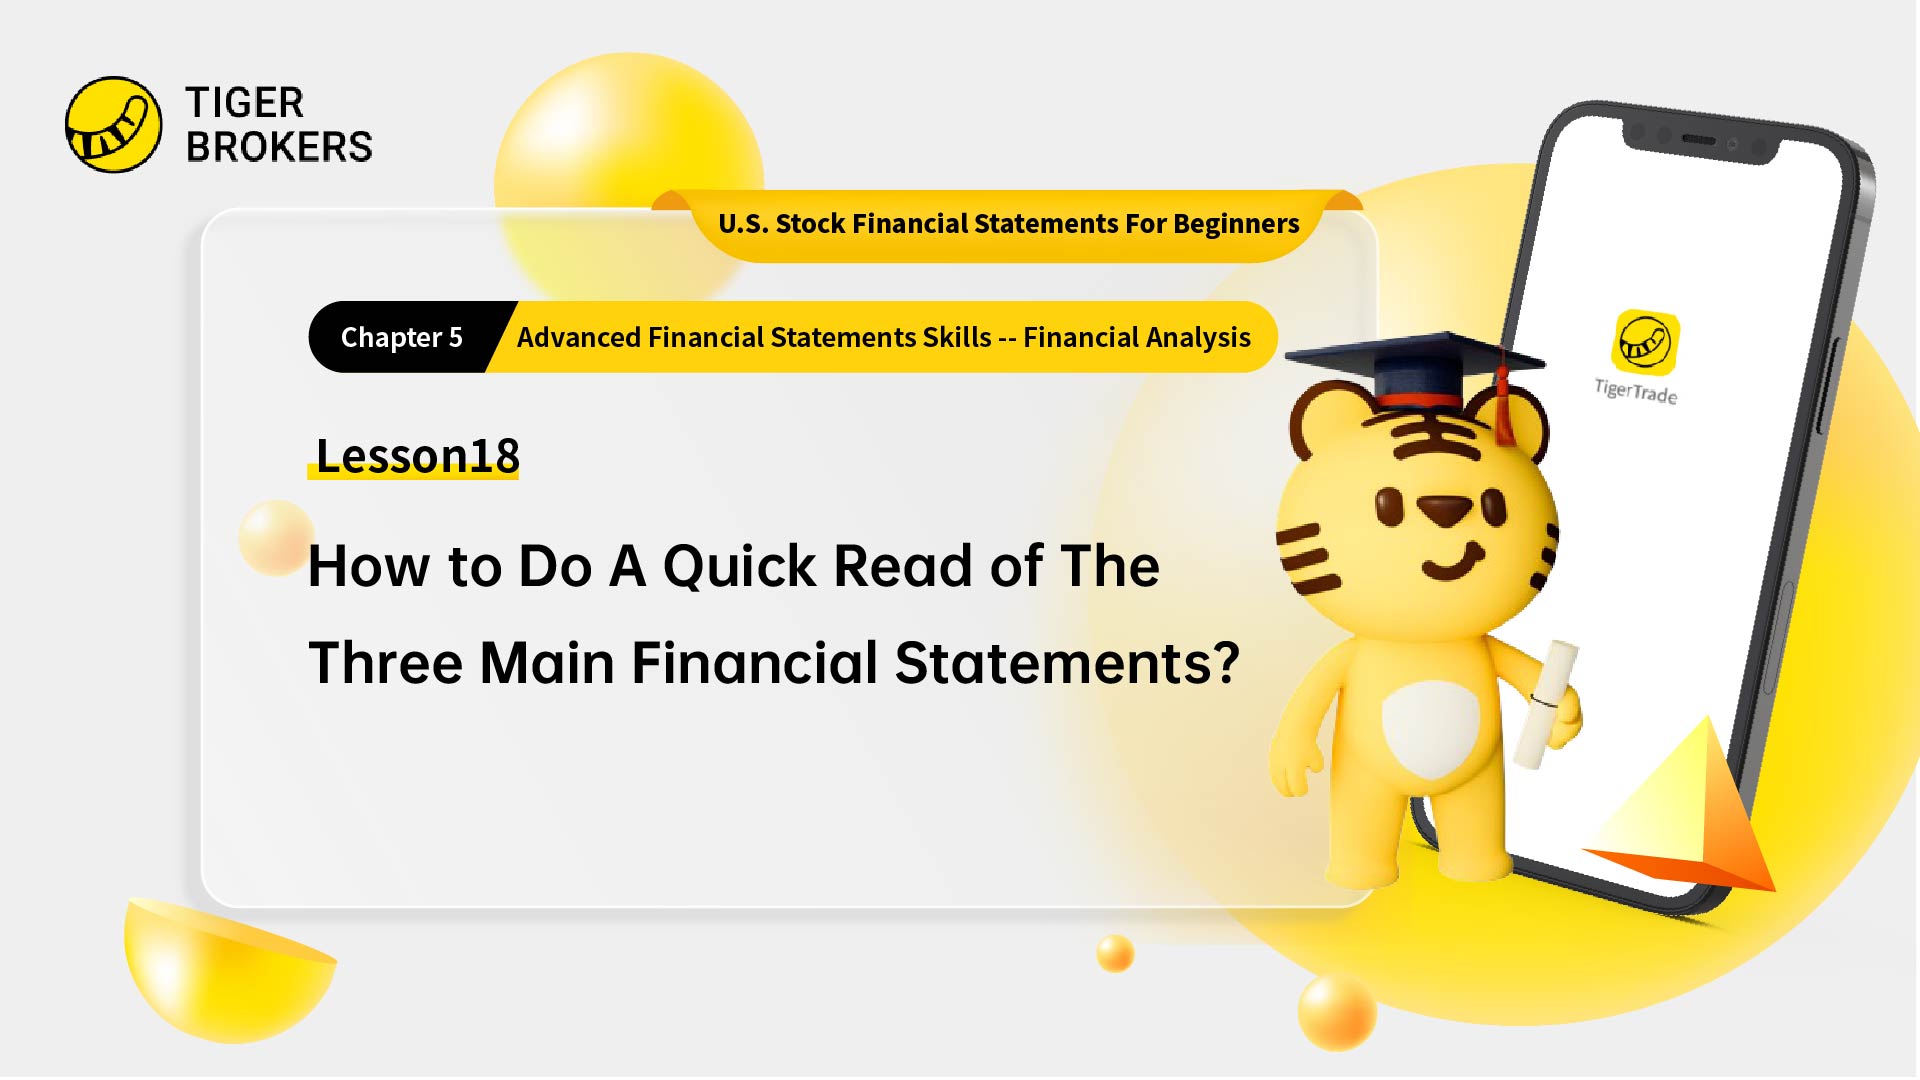 Lesson 18: Quick reading of financial statements